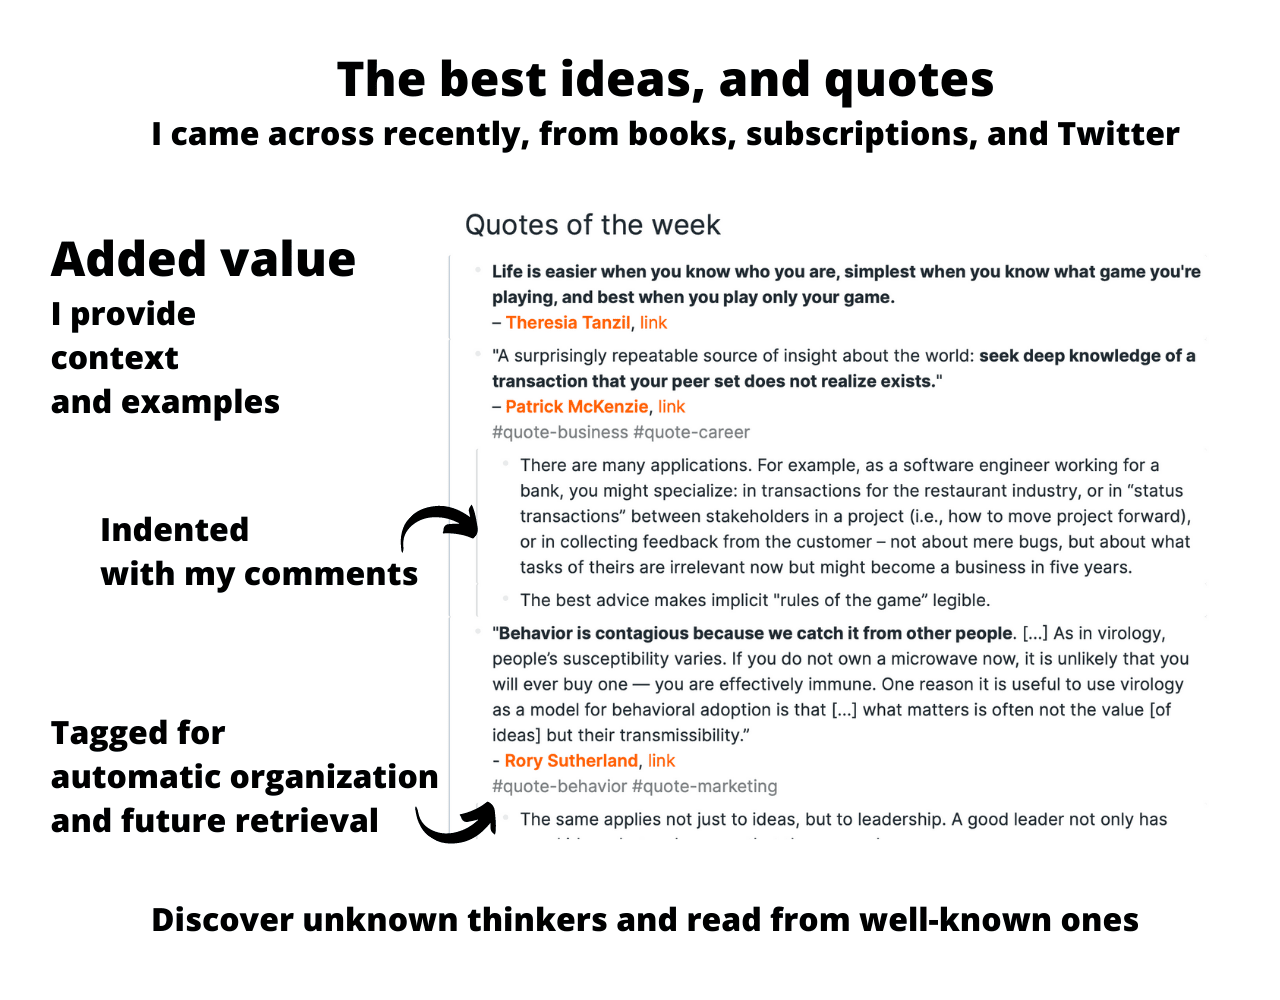 The RoamLetter contains the best ideas and quotes